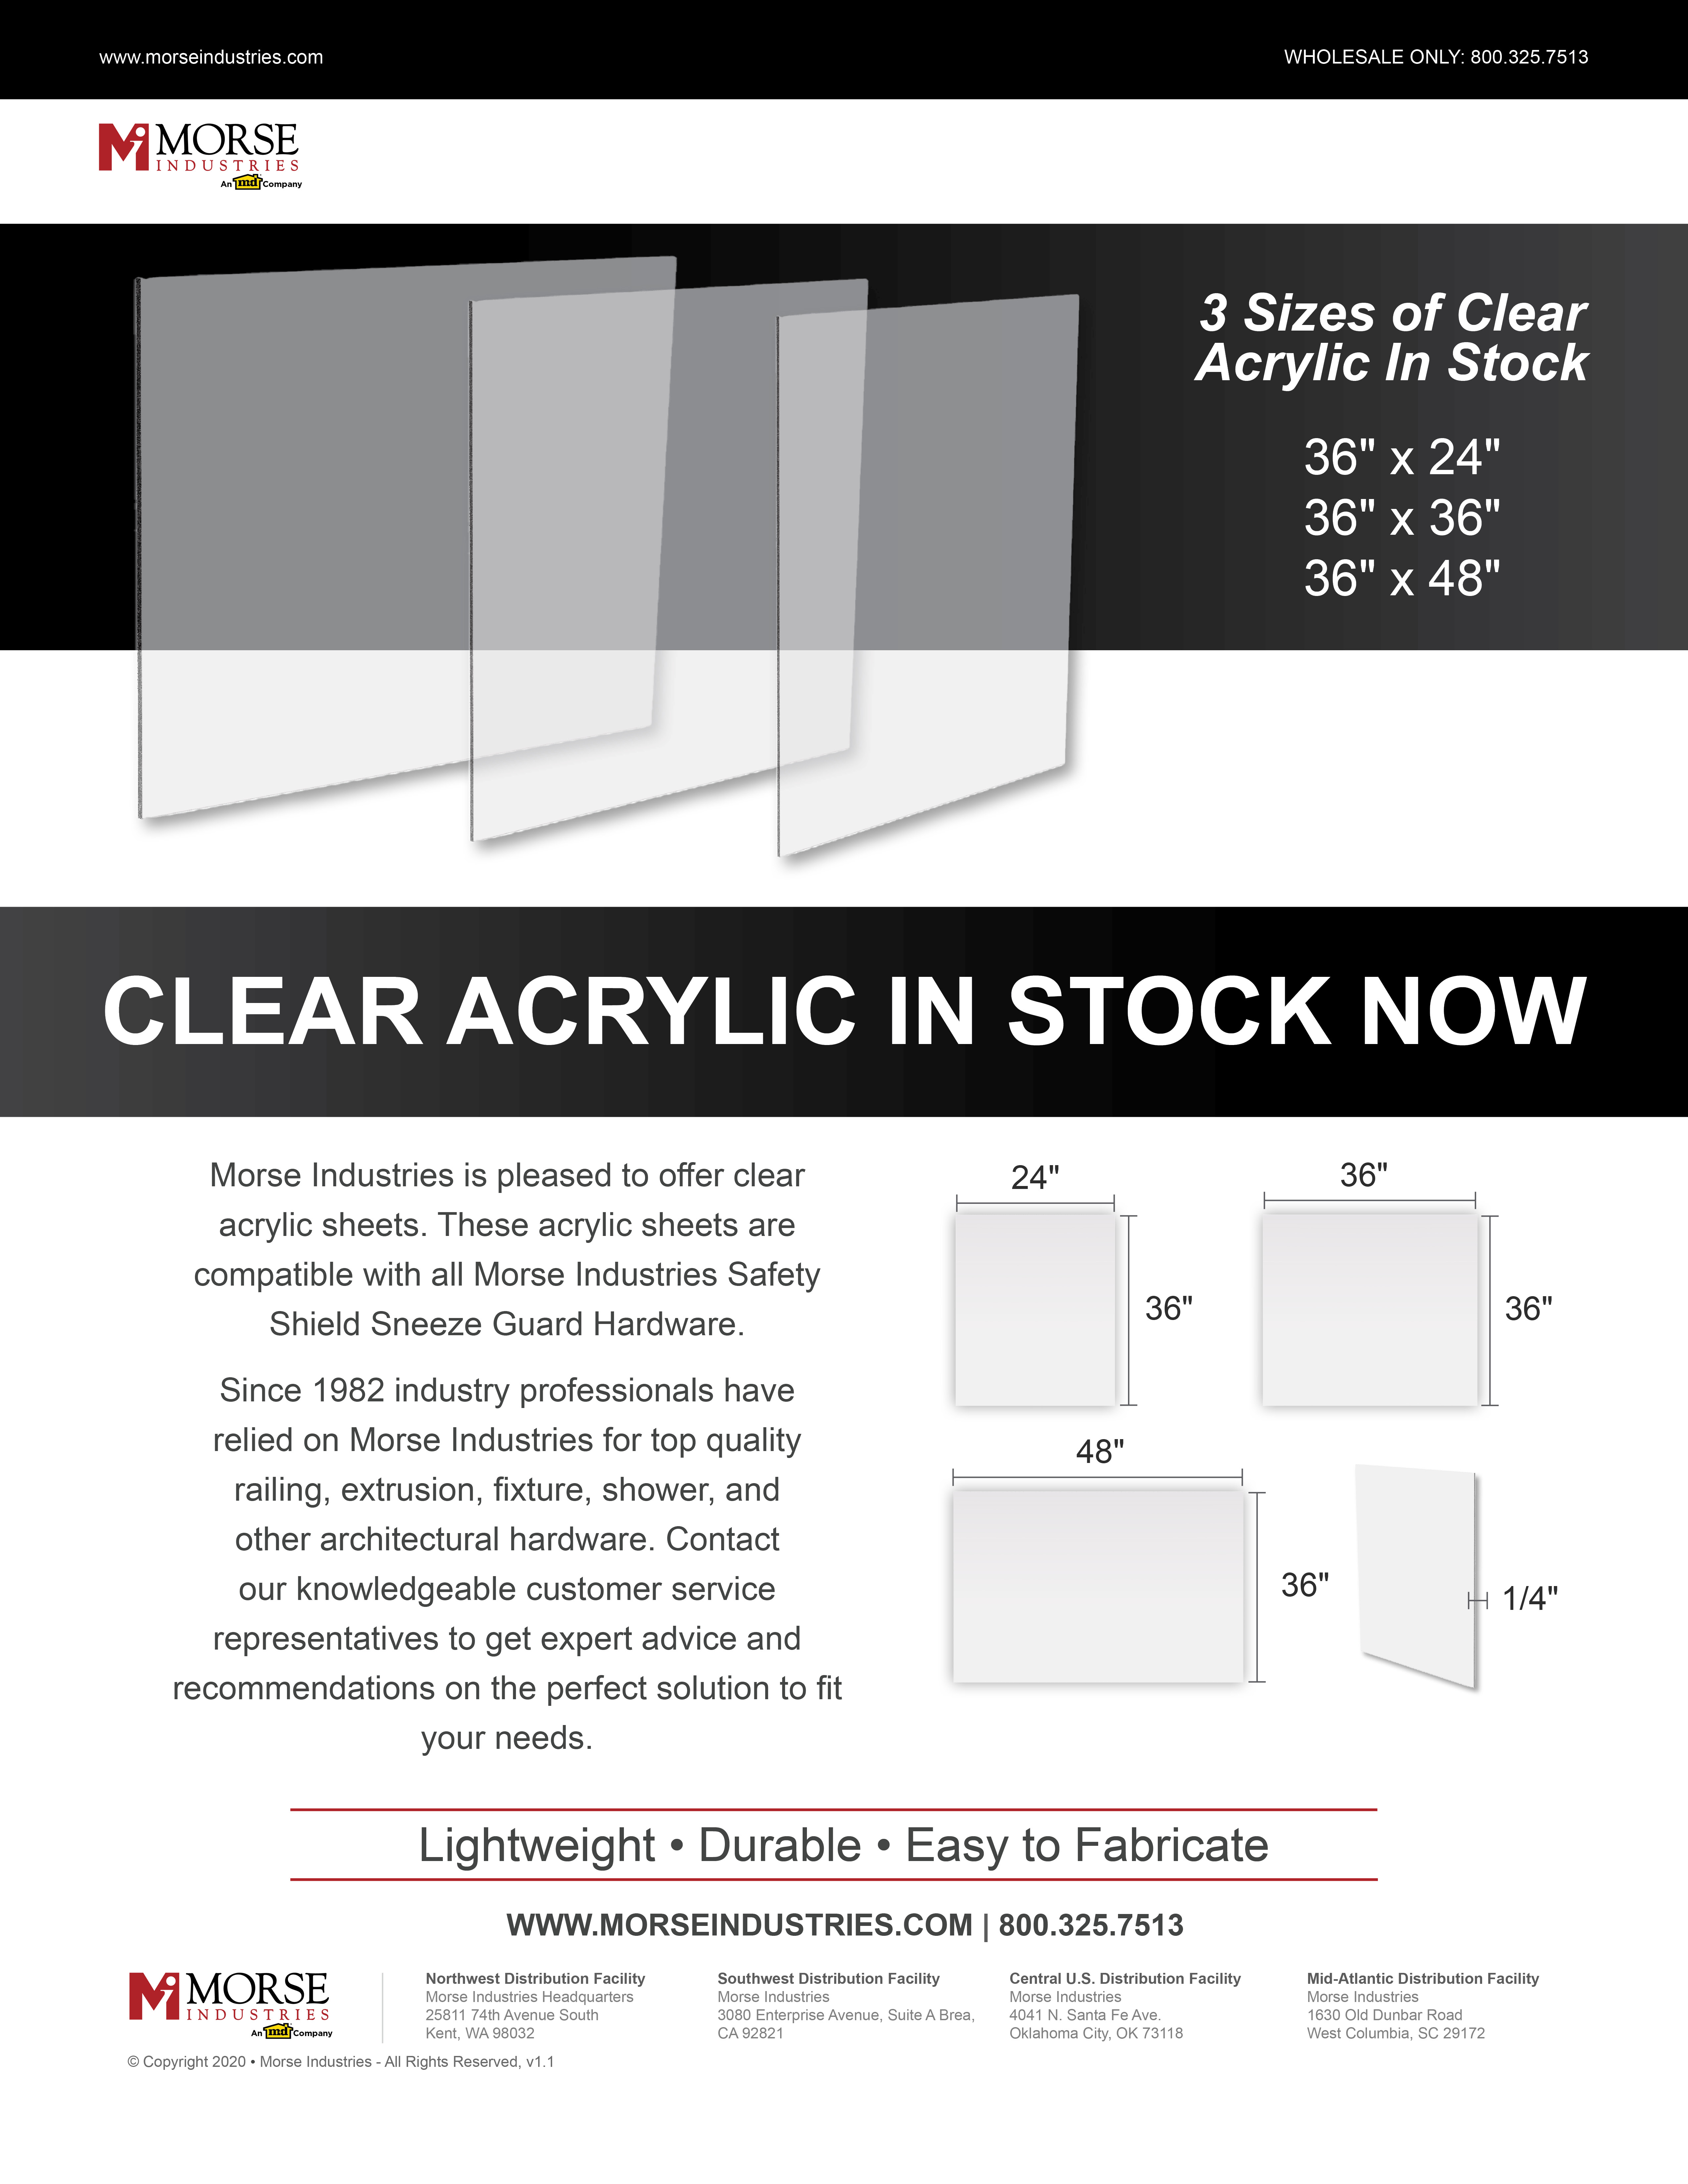 Clear Acrylic Promotional Flyer